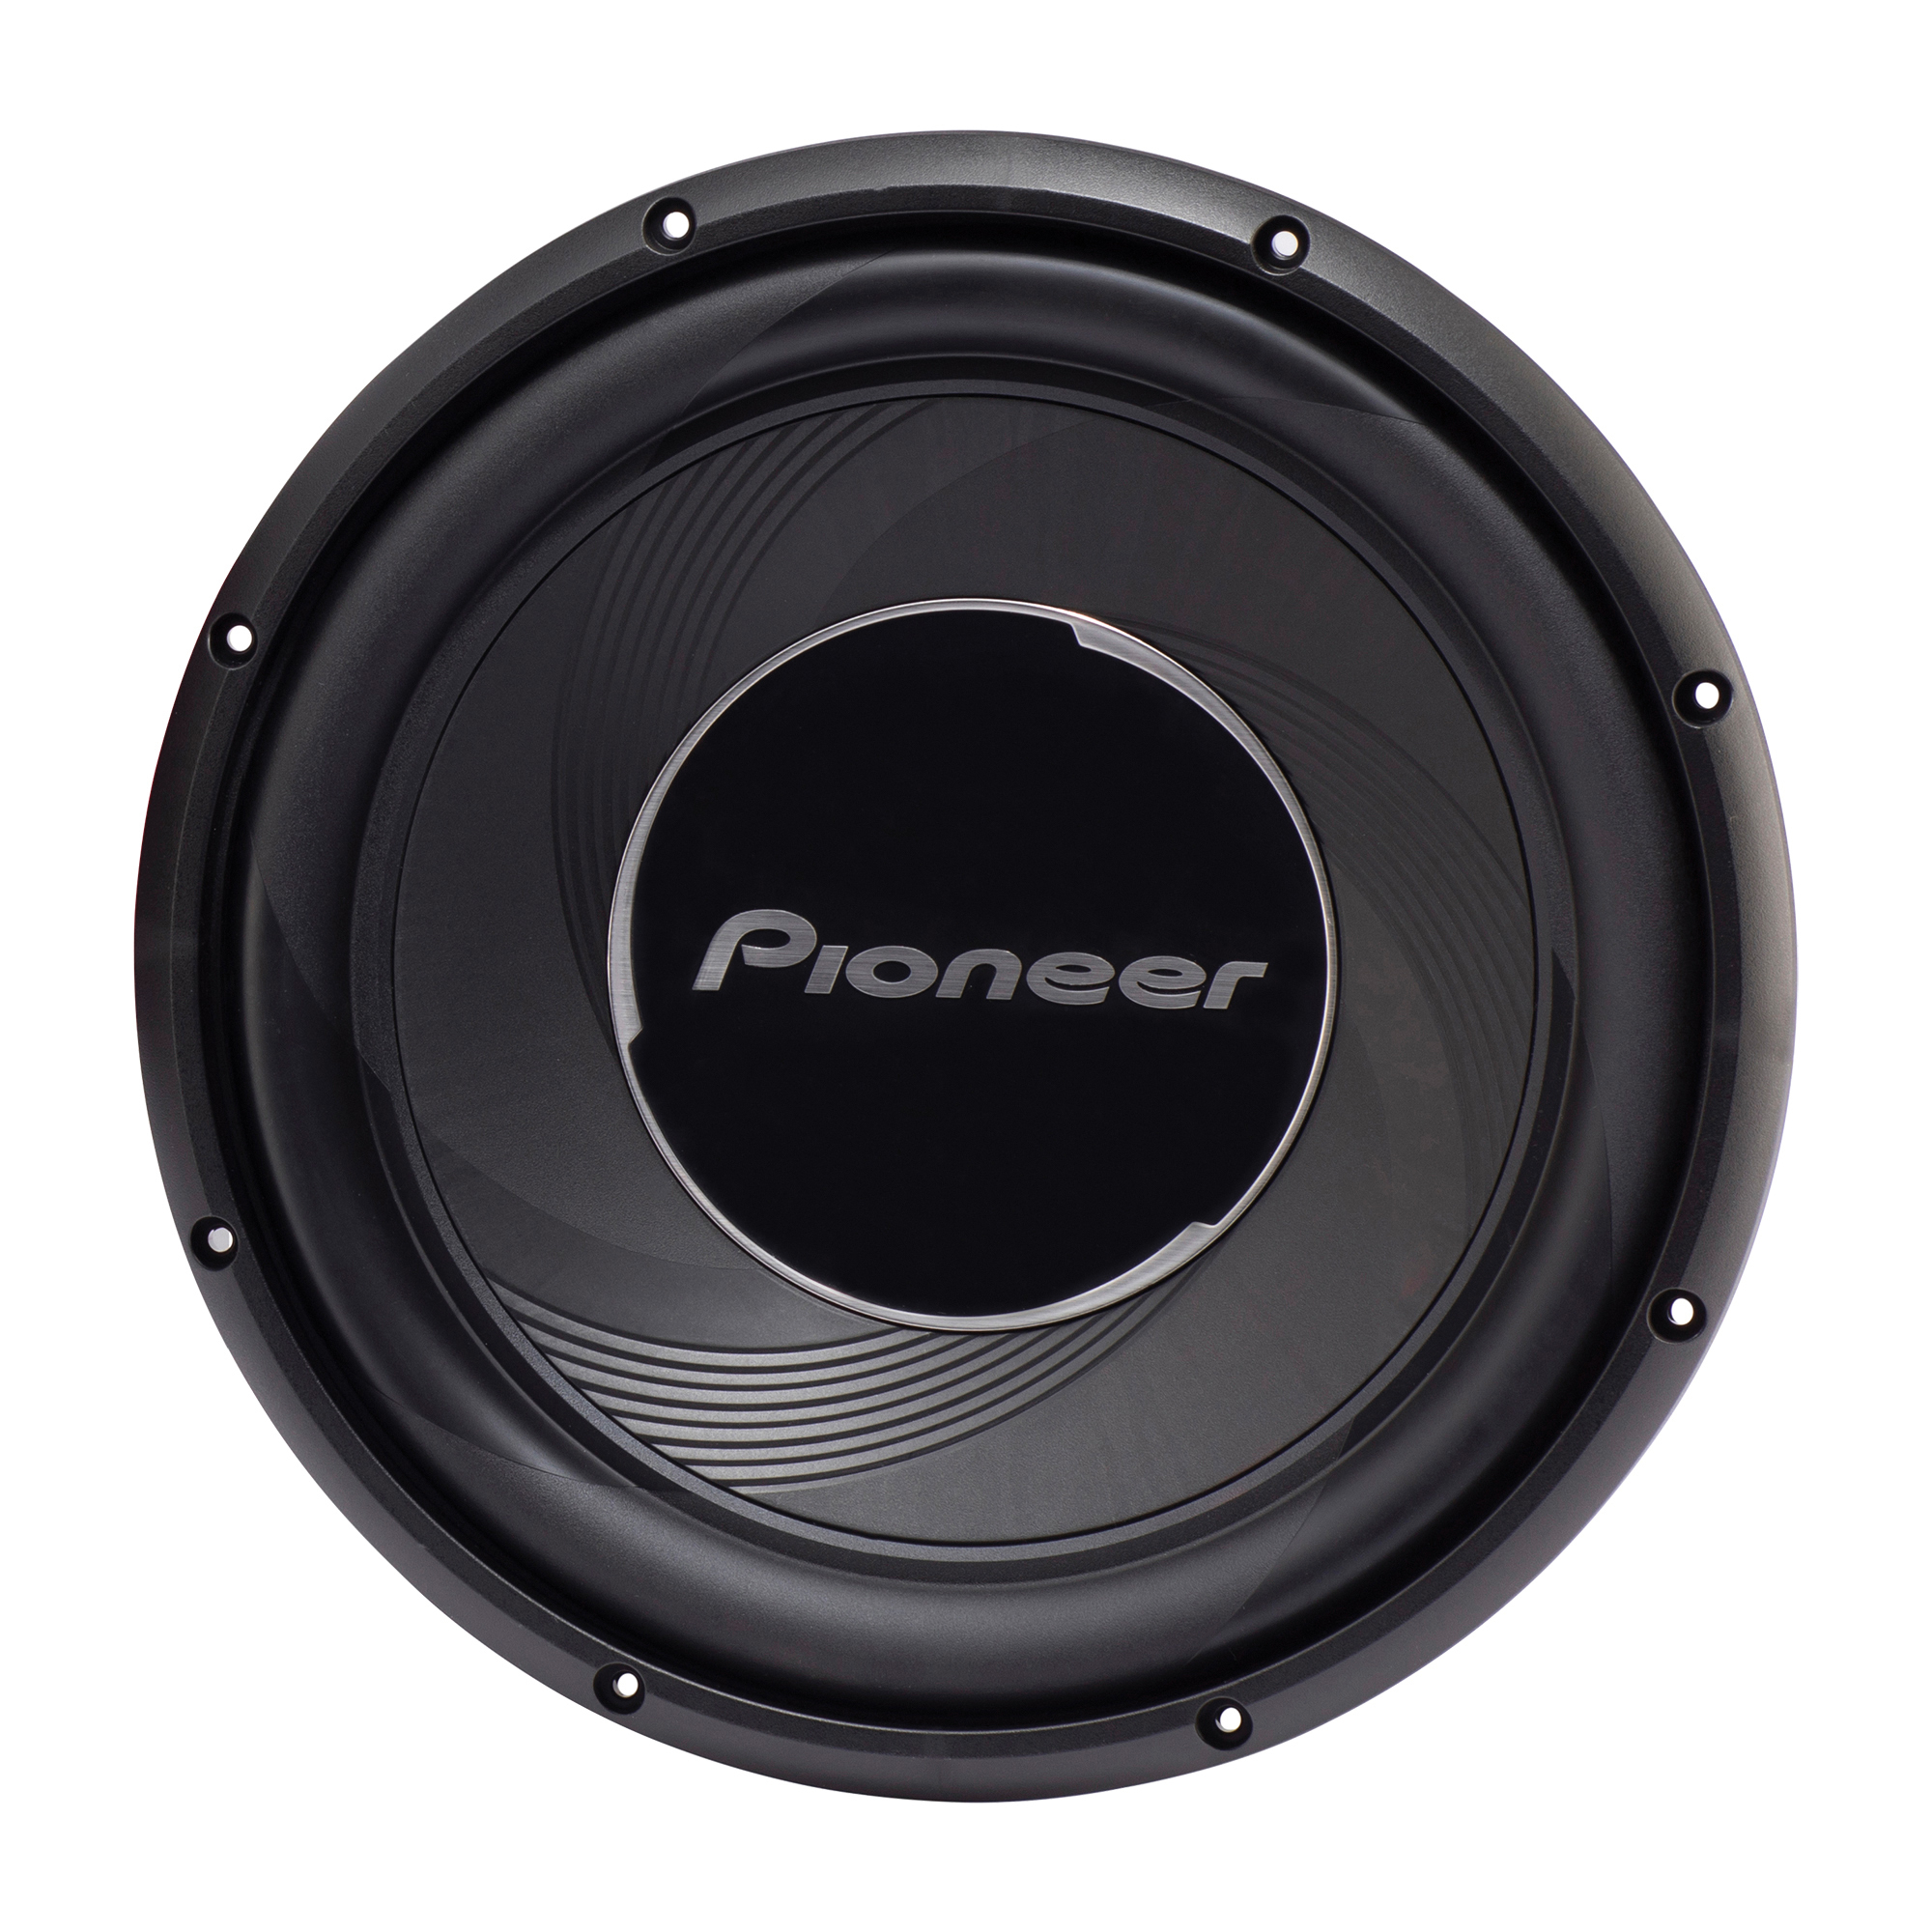 Pioneer A-Series, 4-Ohm Single-Voice-Coil Subwoofer, Model TS-A30S4